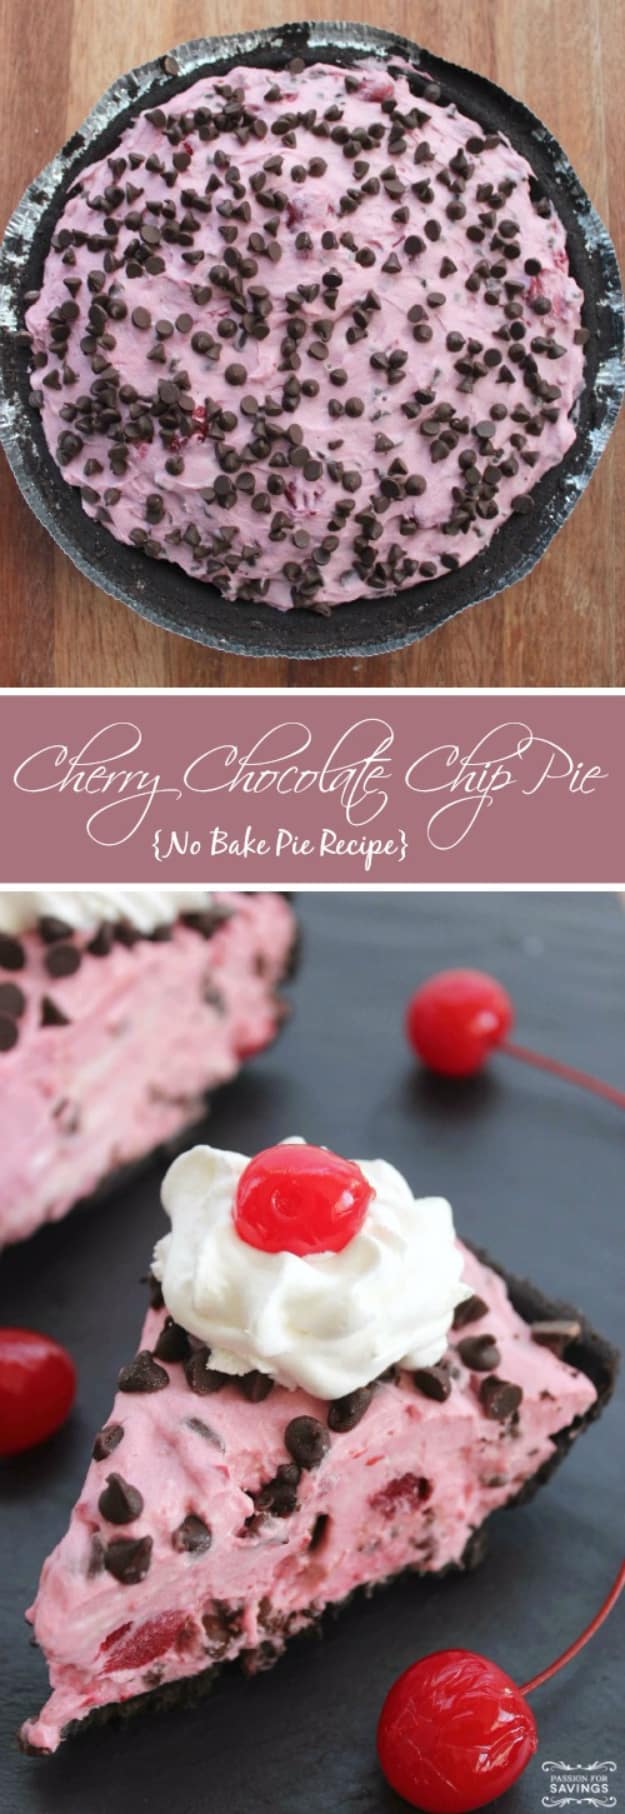 Best Pie Recipes - No Bake Cherry Chocolate Chip Pie - Easy Pie Recipes From Scratch for Pecan, Apple, Banana, Pumpkin, Fruit, Peach and Chocolate Pies. Yummy Graham Cracker Crusts and Homemade Meringue #recipes #dessert